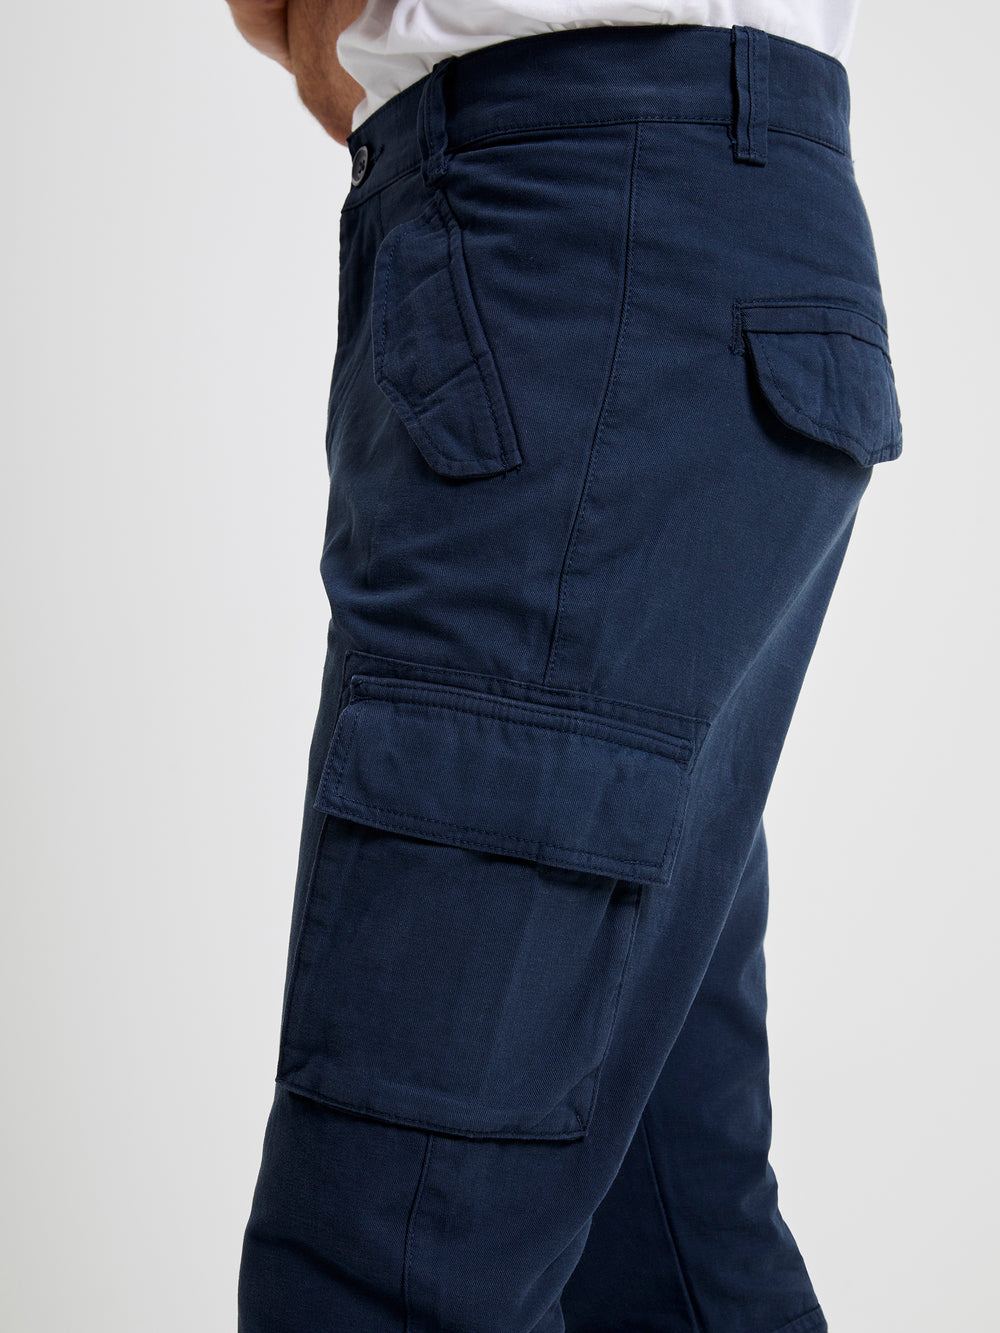 Mens Trousers up to 60 inch waist and 33 inside leg